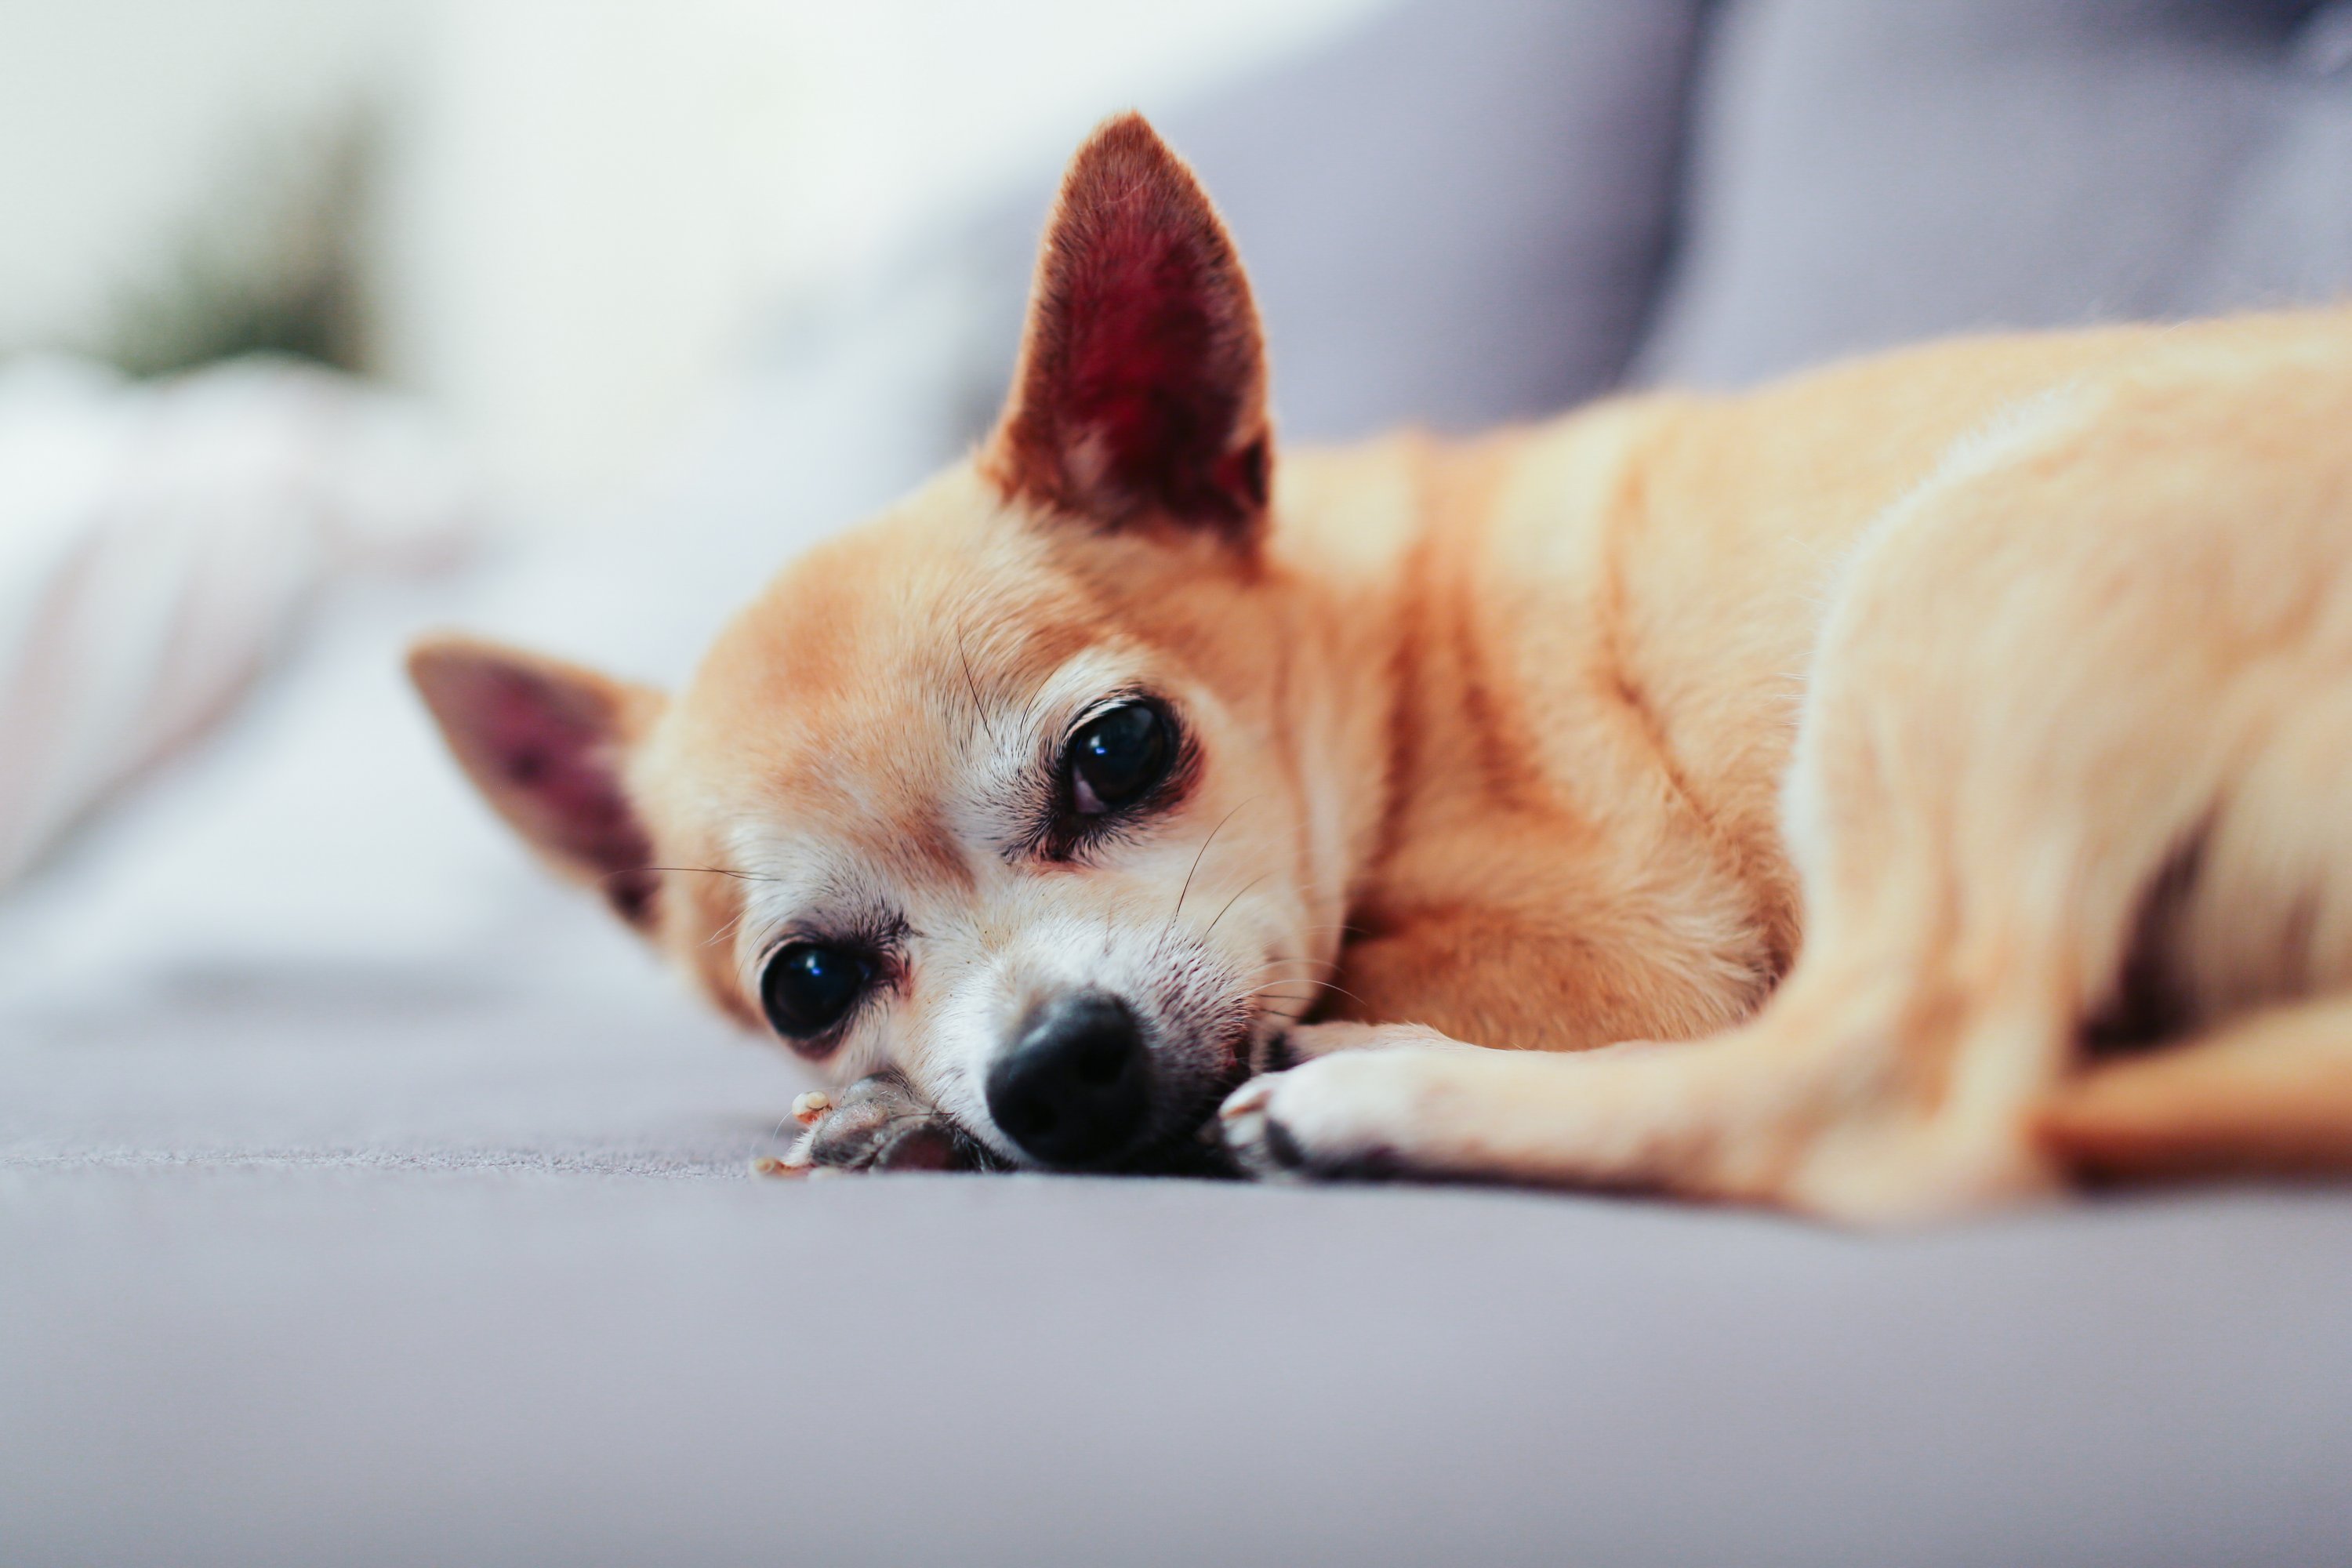 Washingtonia's Cutest Dog Contest:Who could resist those eyes? Photograph by Alicia Gauthier via Unsplash.